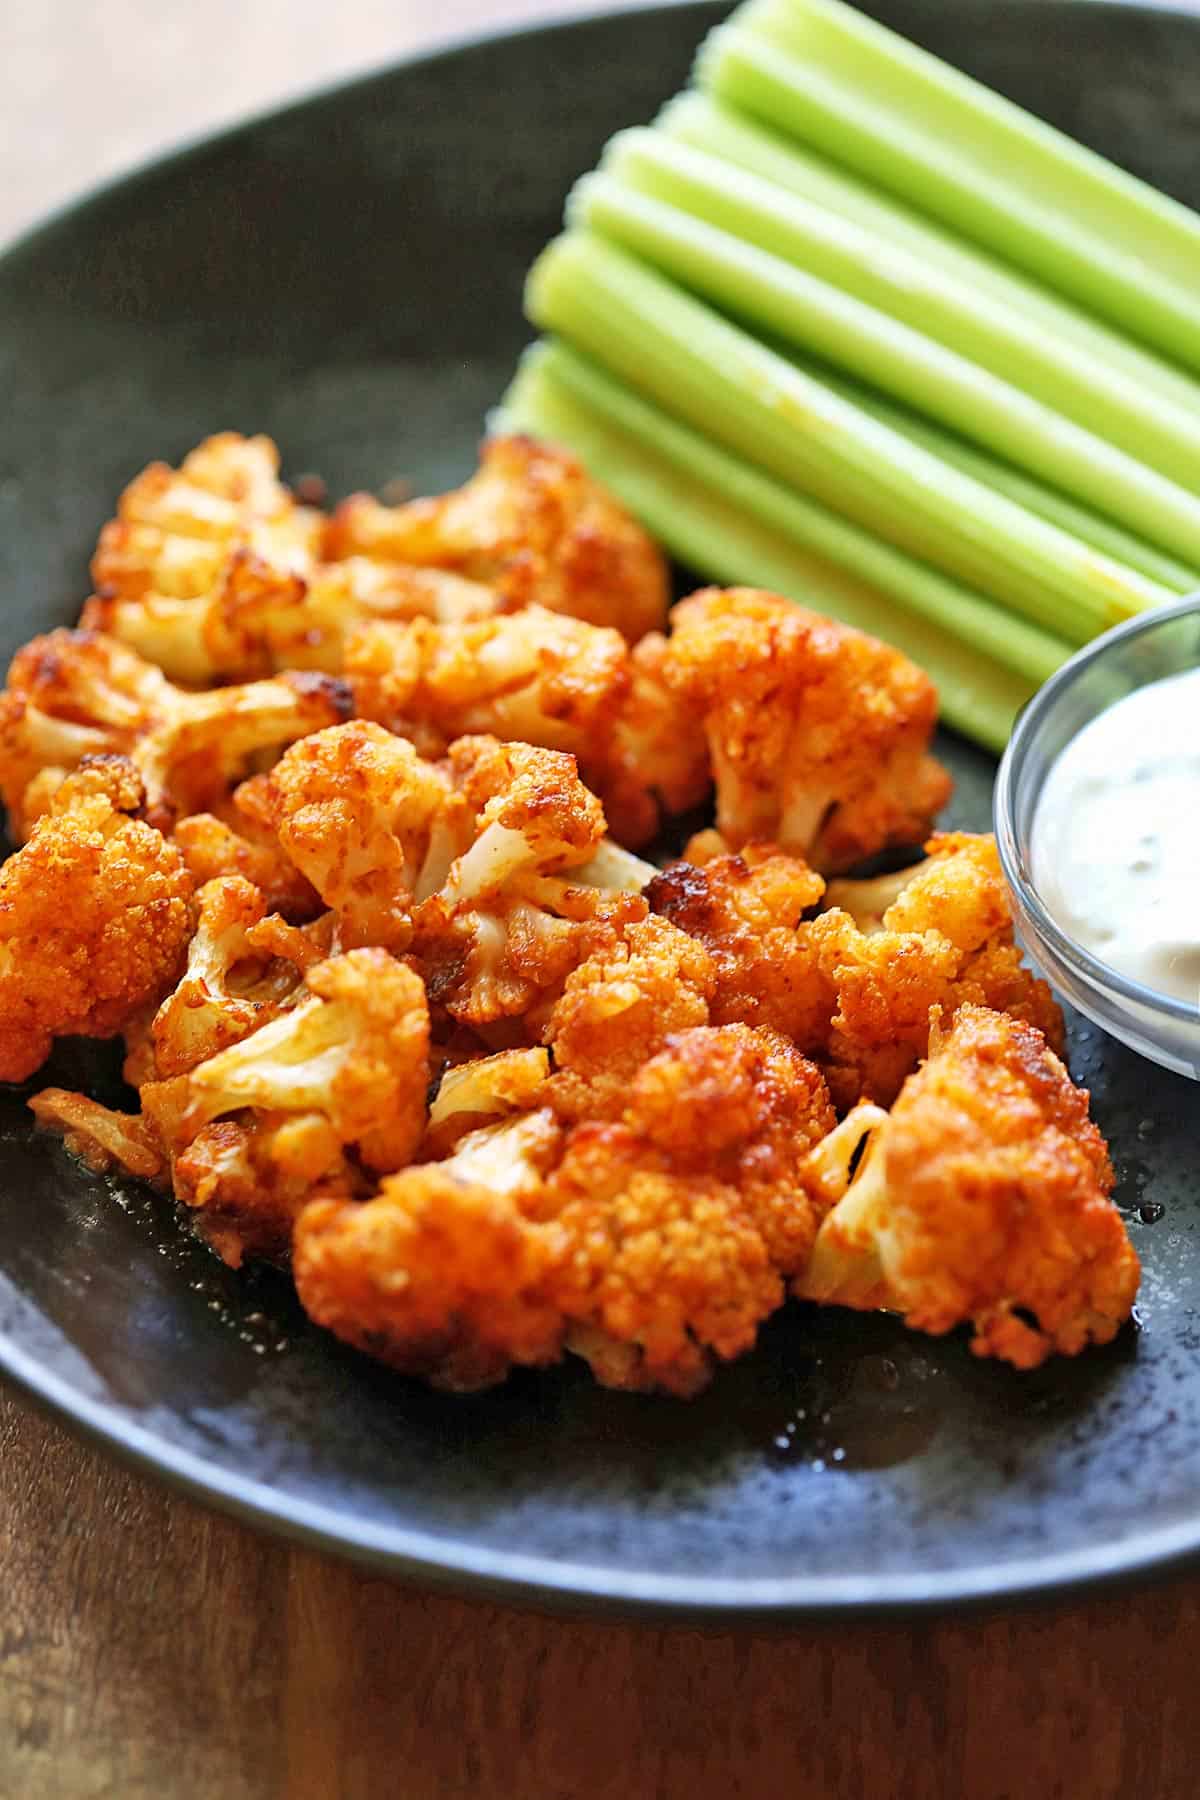 Buffalo cauliflower is served with celery and blue cheese dressing.